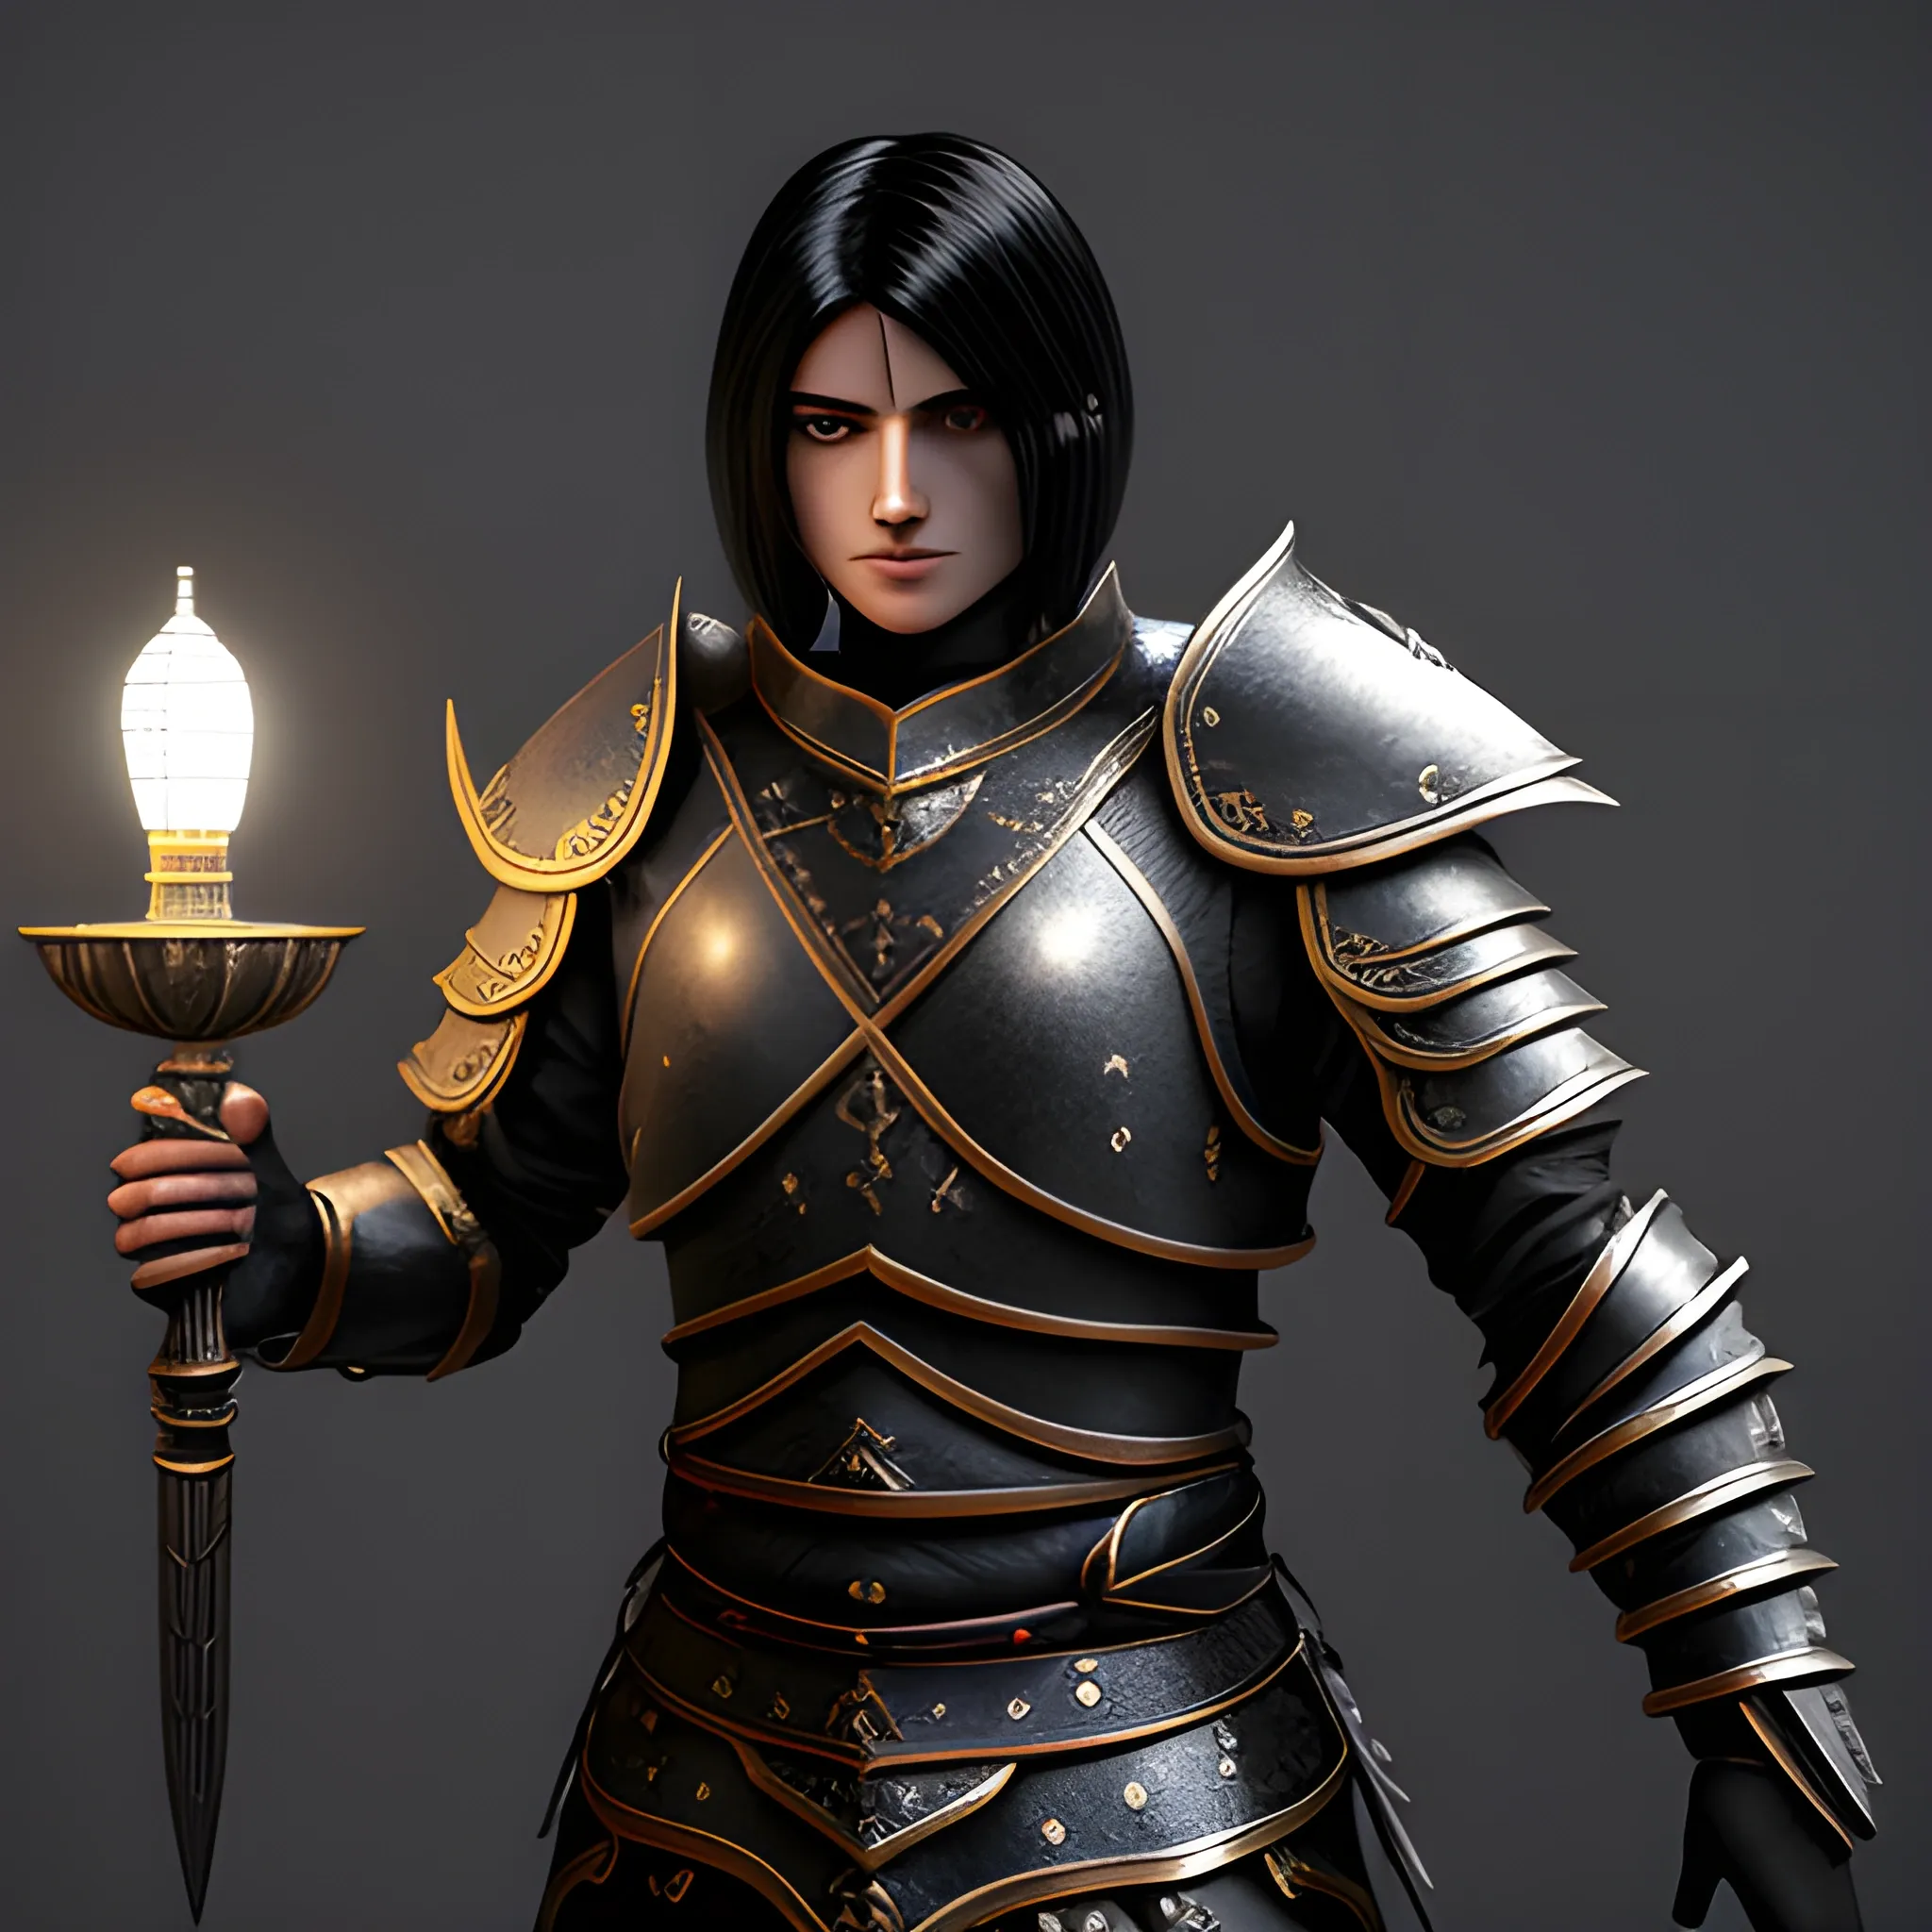 black haired male aasimar in leather armor holding a jinn lamp
, Trippy, 3D